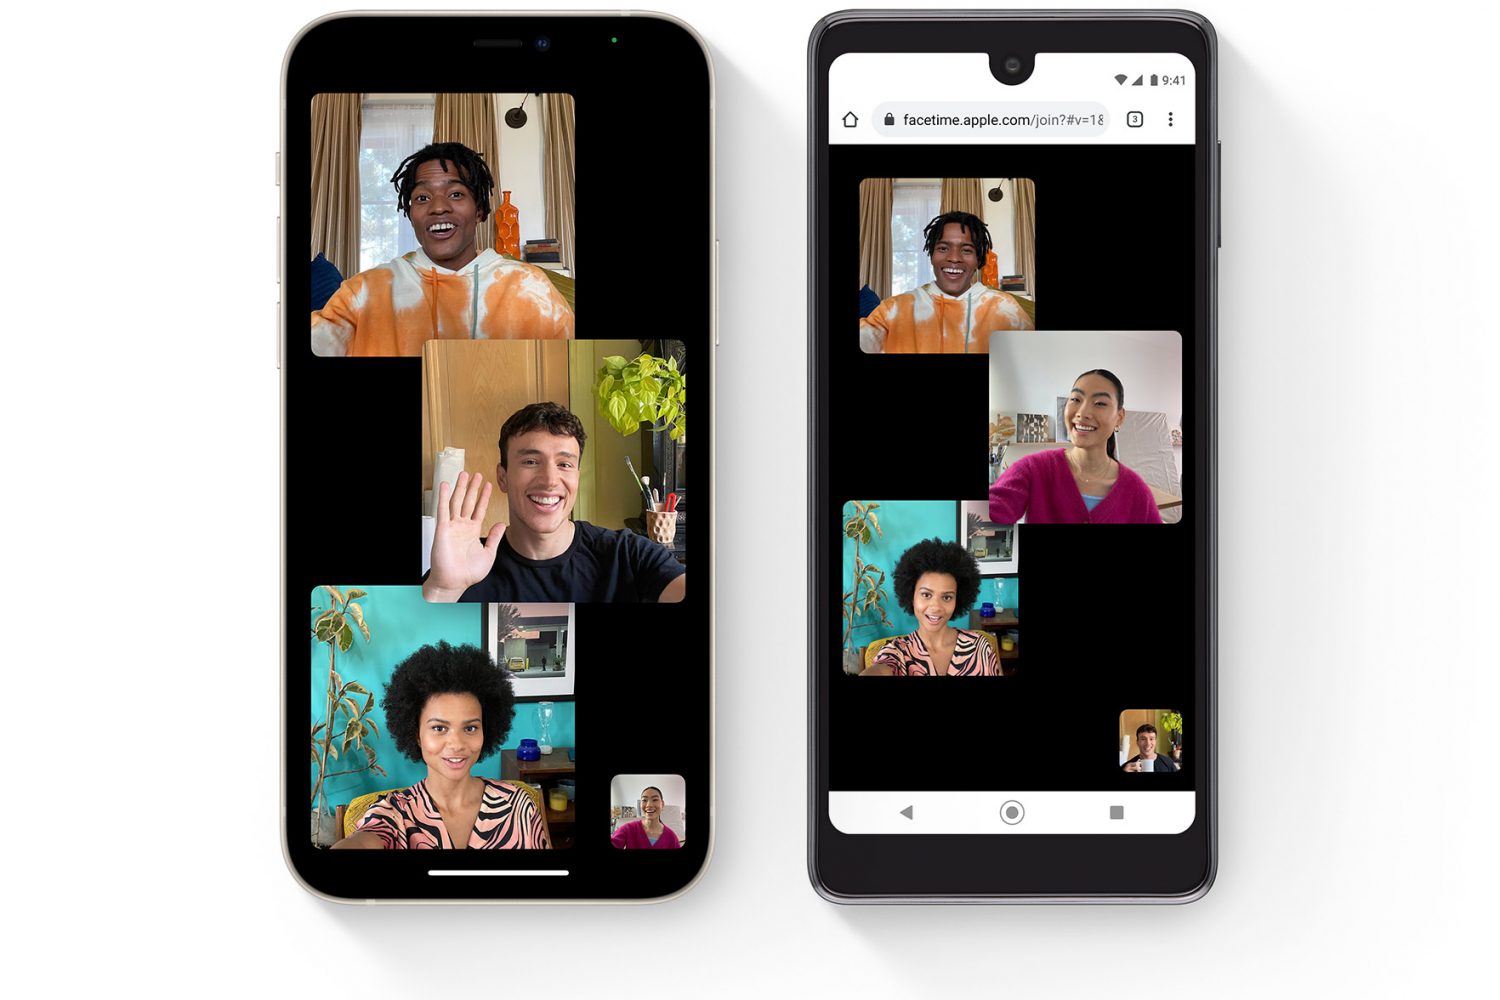 Apple website image showing iOS 15 FaceTime on iPhone and Android